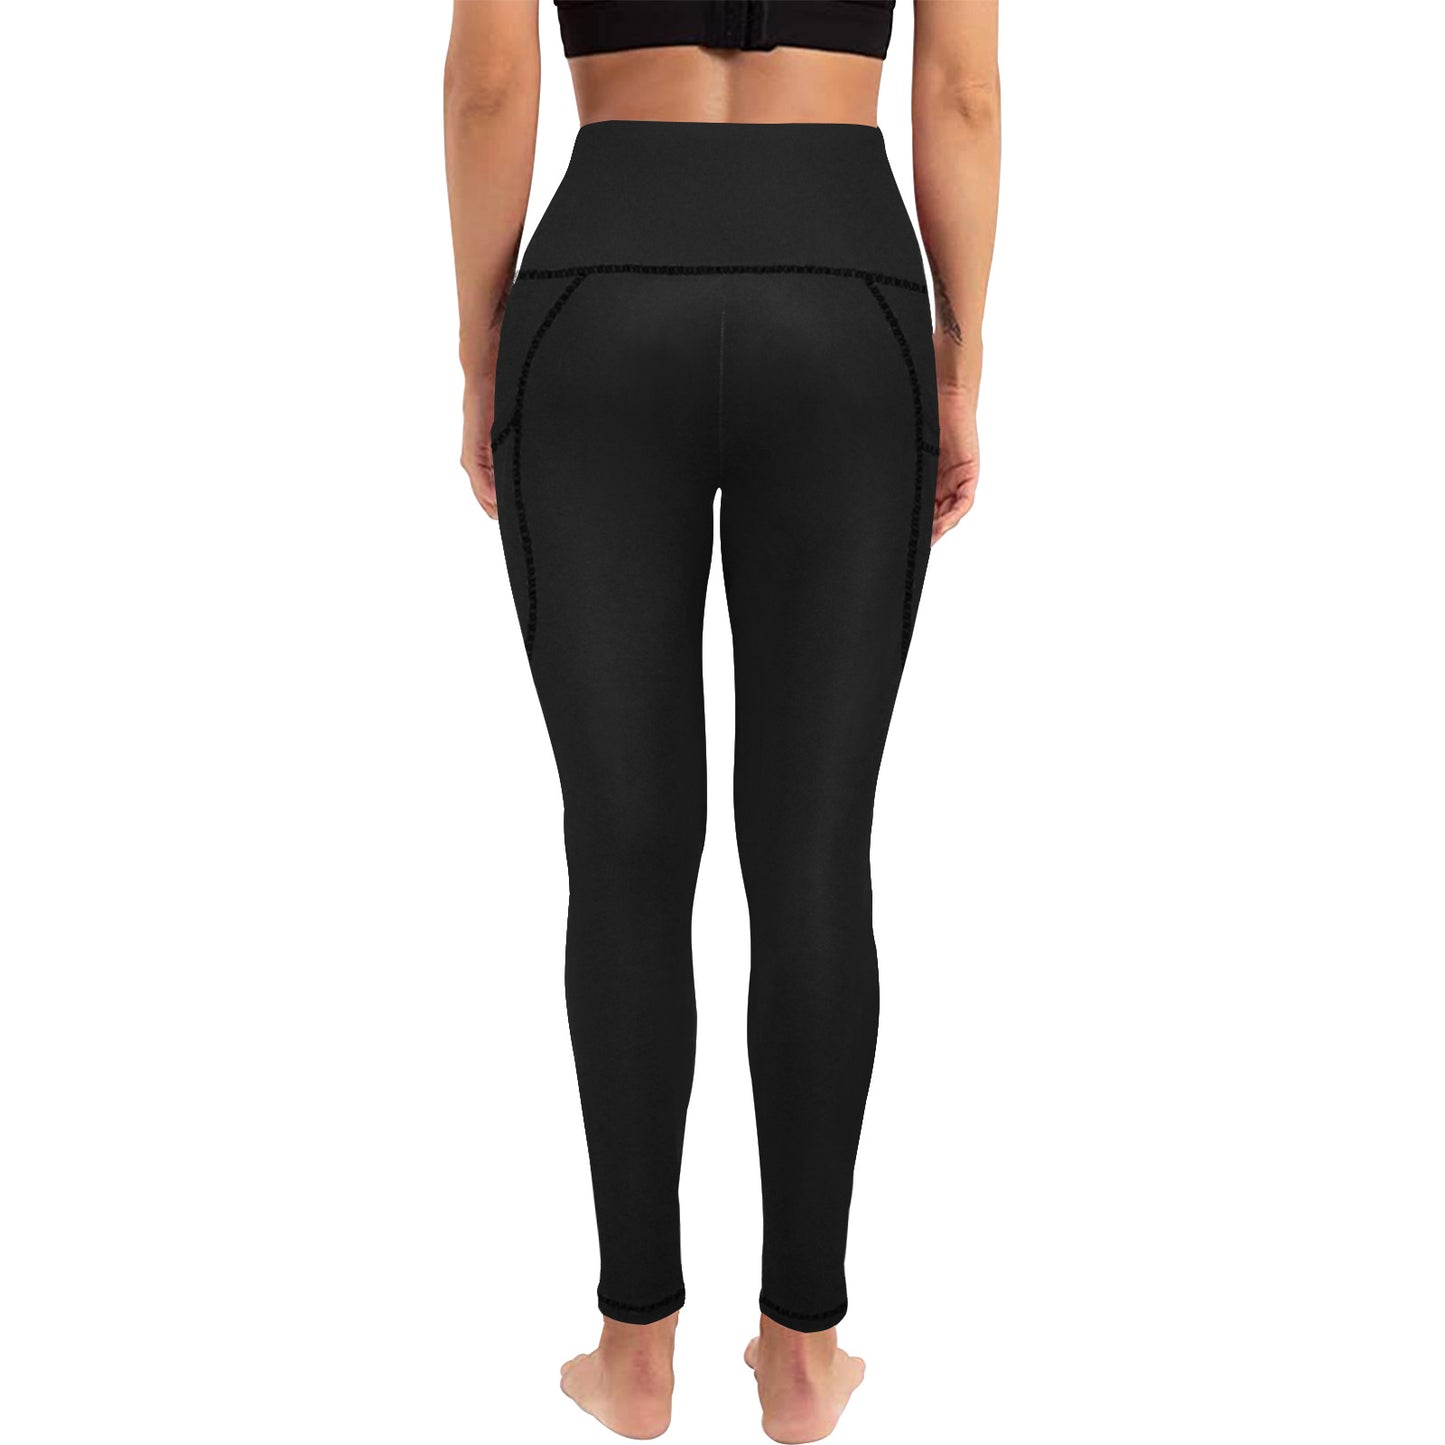 Black Women's Athletic Leggings With Pockets